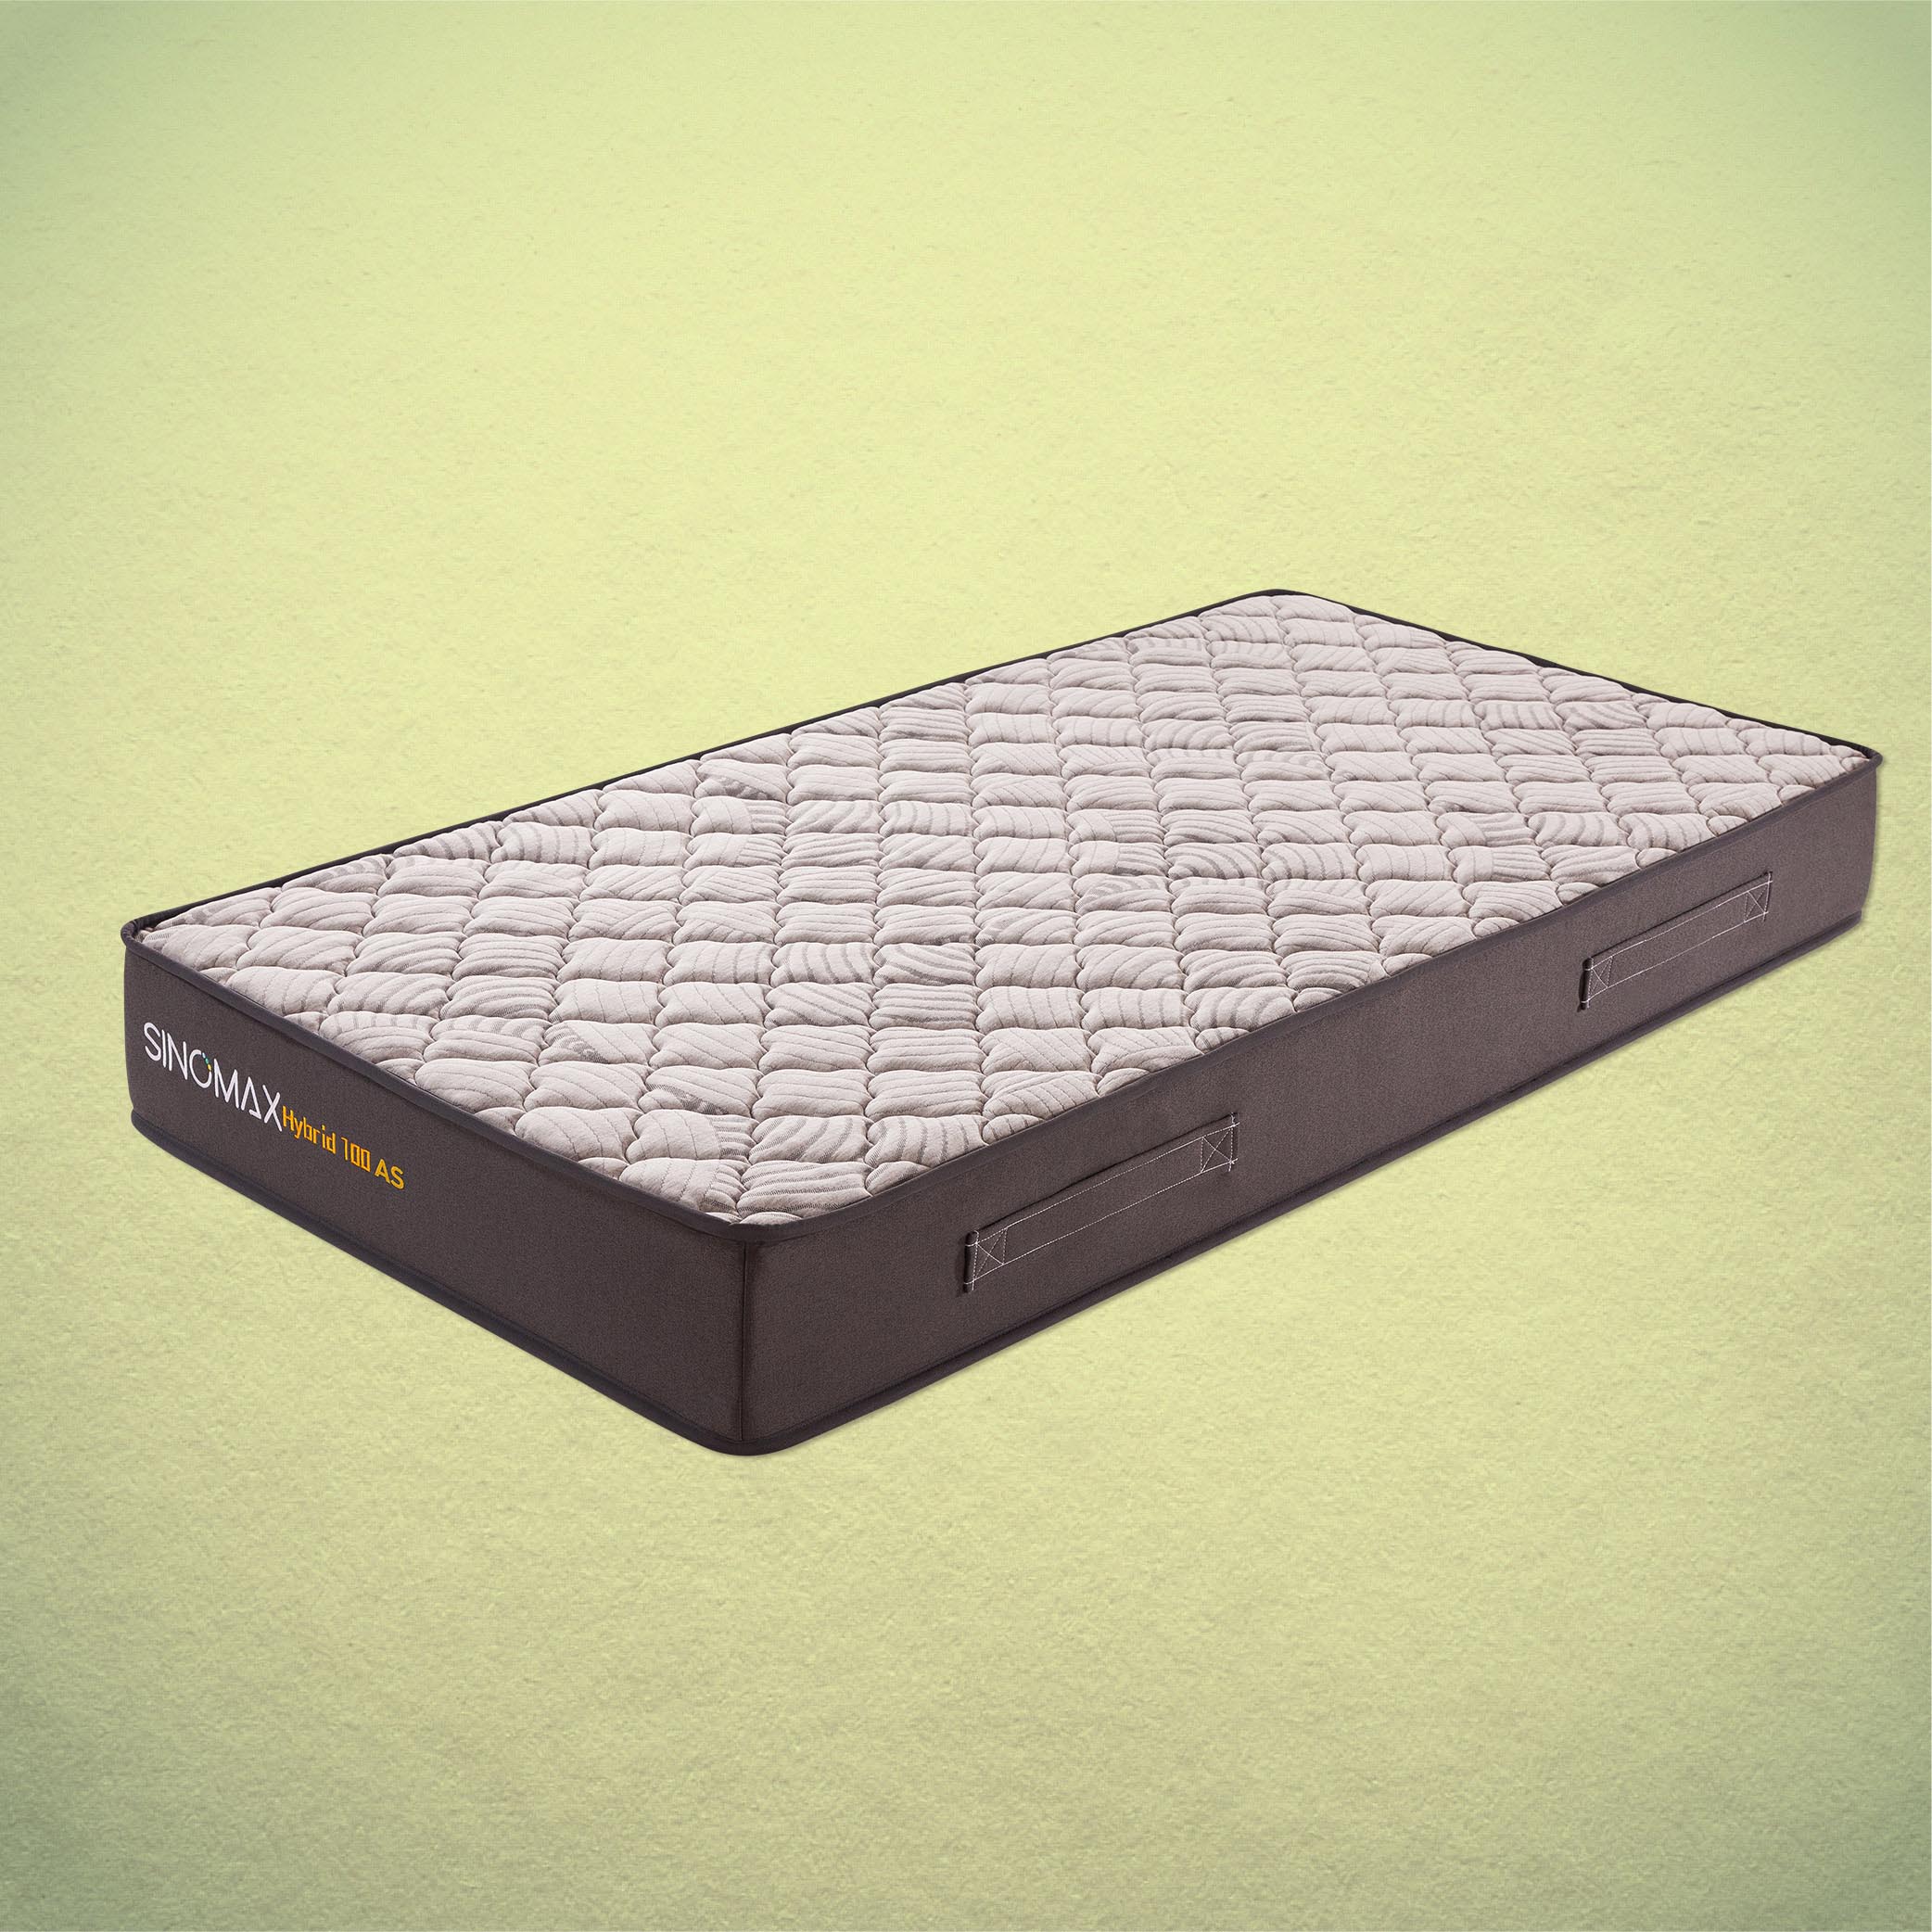 Hybrid 100 AS Mattress - Tailor-made size (Above 48" Width)